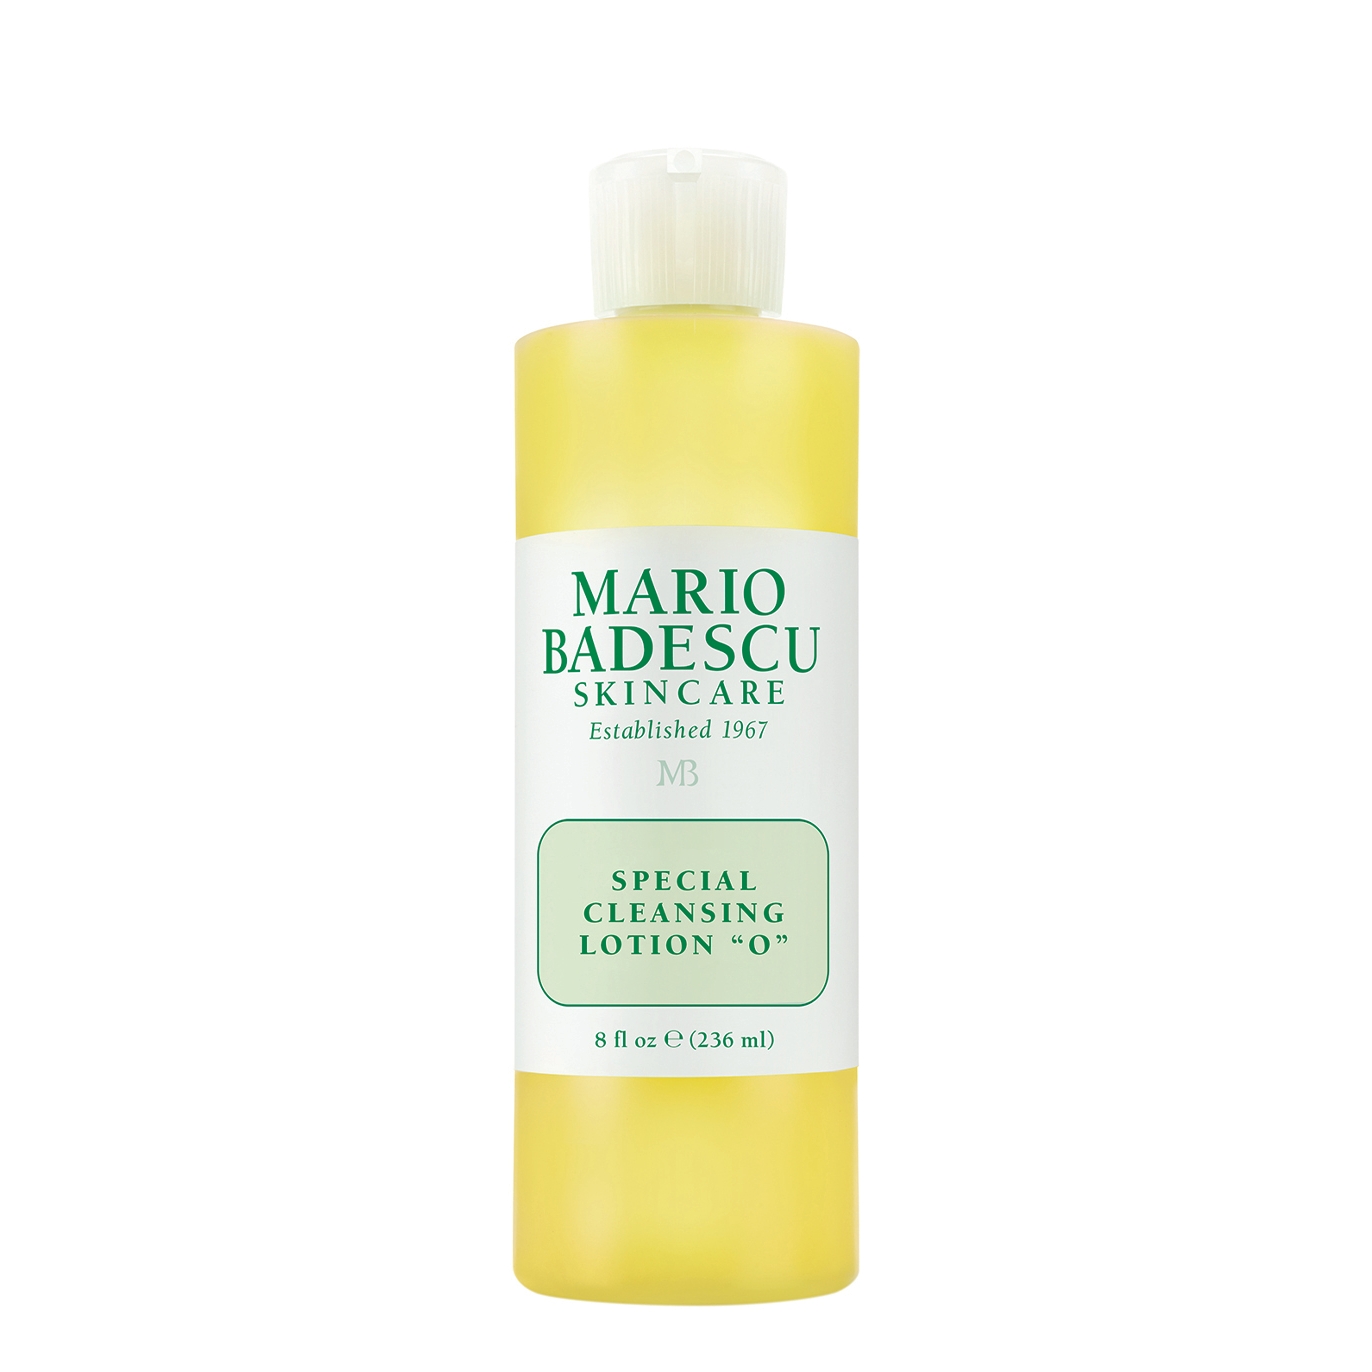 Mario Badescu Special Cleansing Lotion "O" For Chest And Back 236ml